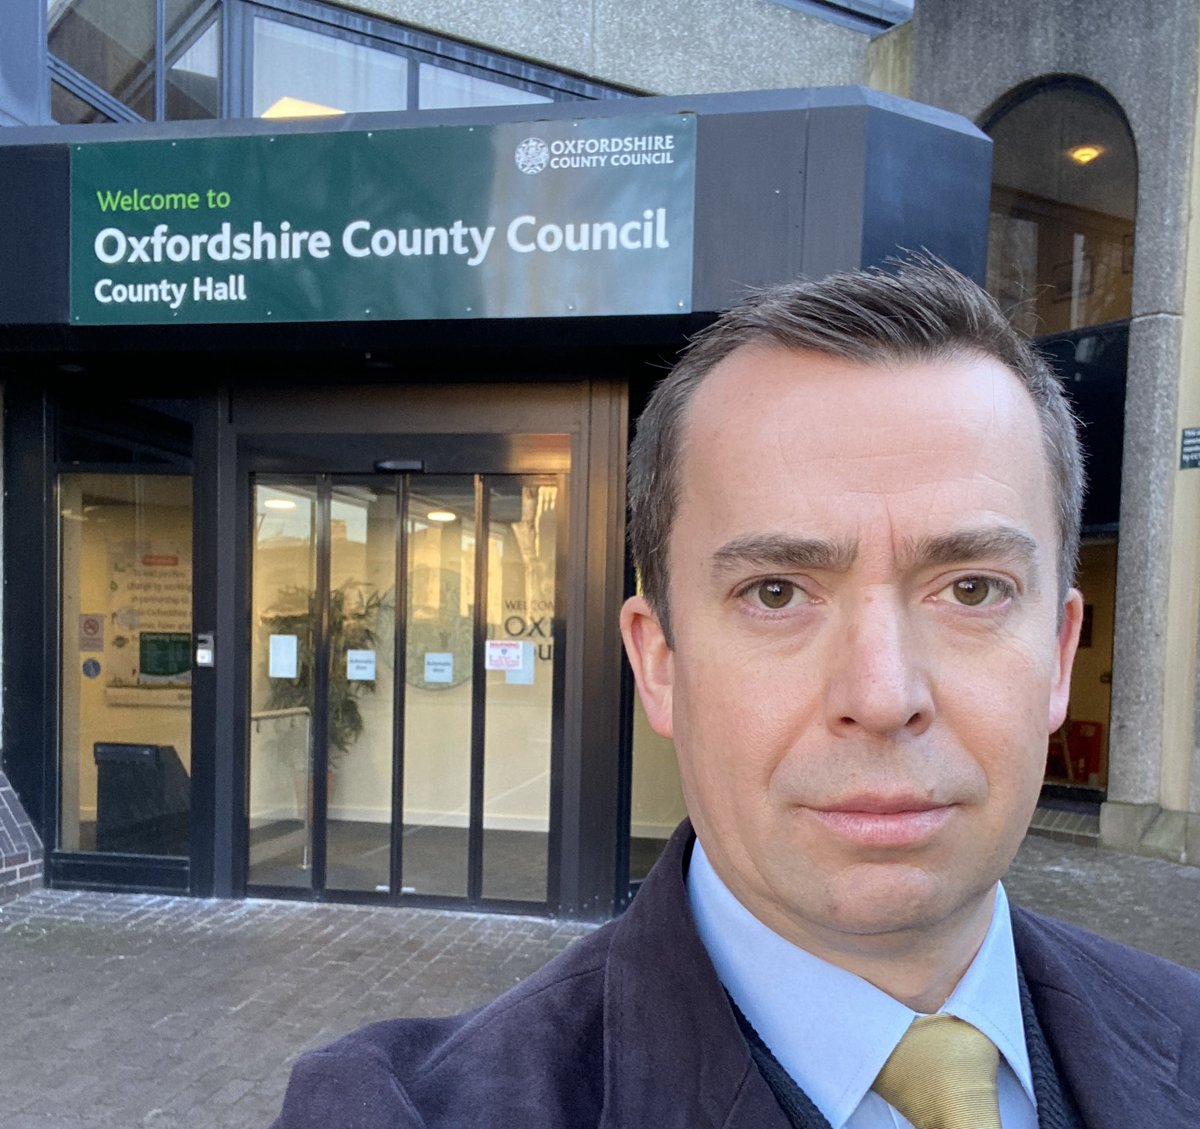 Performance scrutiny committee today @OxfordshireCC on latest draft budget. Some very hard choices as Jeremy Hunt took further £2.1m out of expected sums. OCC has stewarded money well but local govt financing is in crisis. Great explainer: bbc.co.uk/sounds/play/m0…